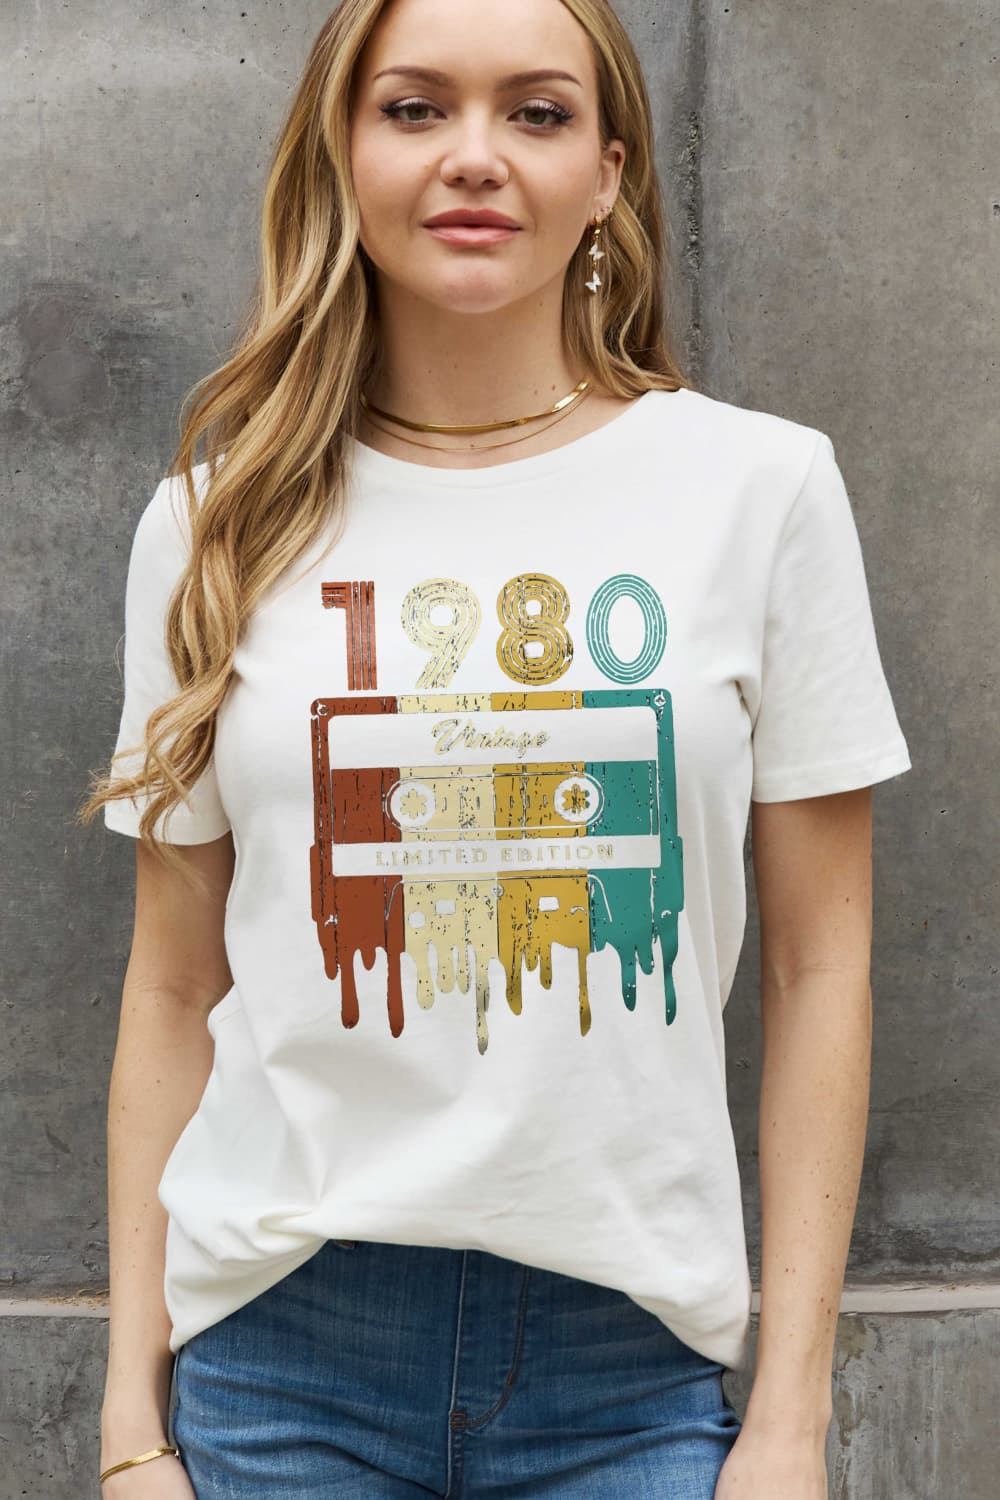 1980 Vintage Limited Edition Graphic Tee